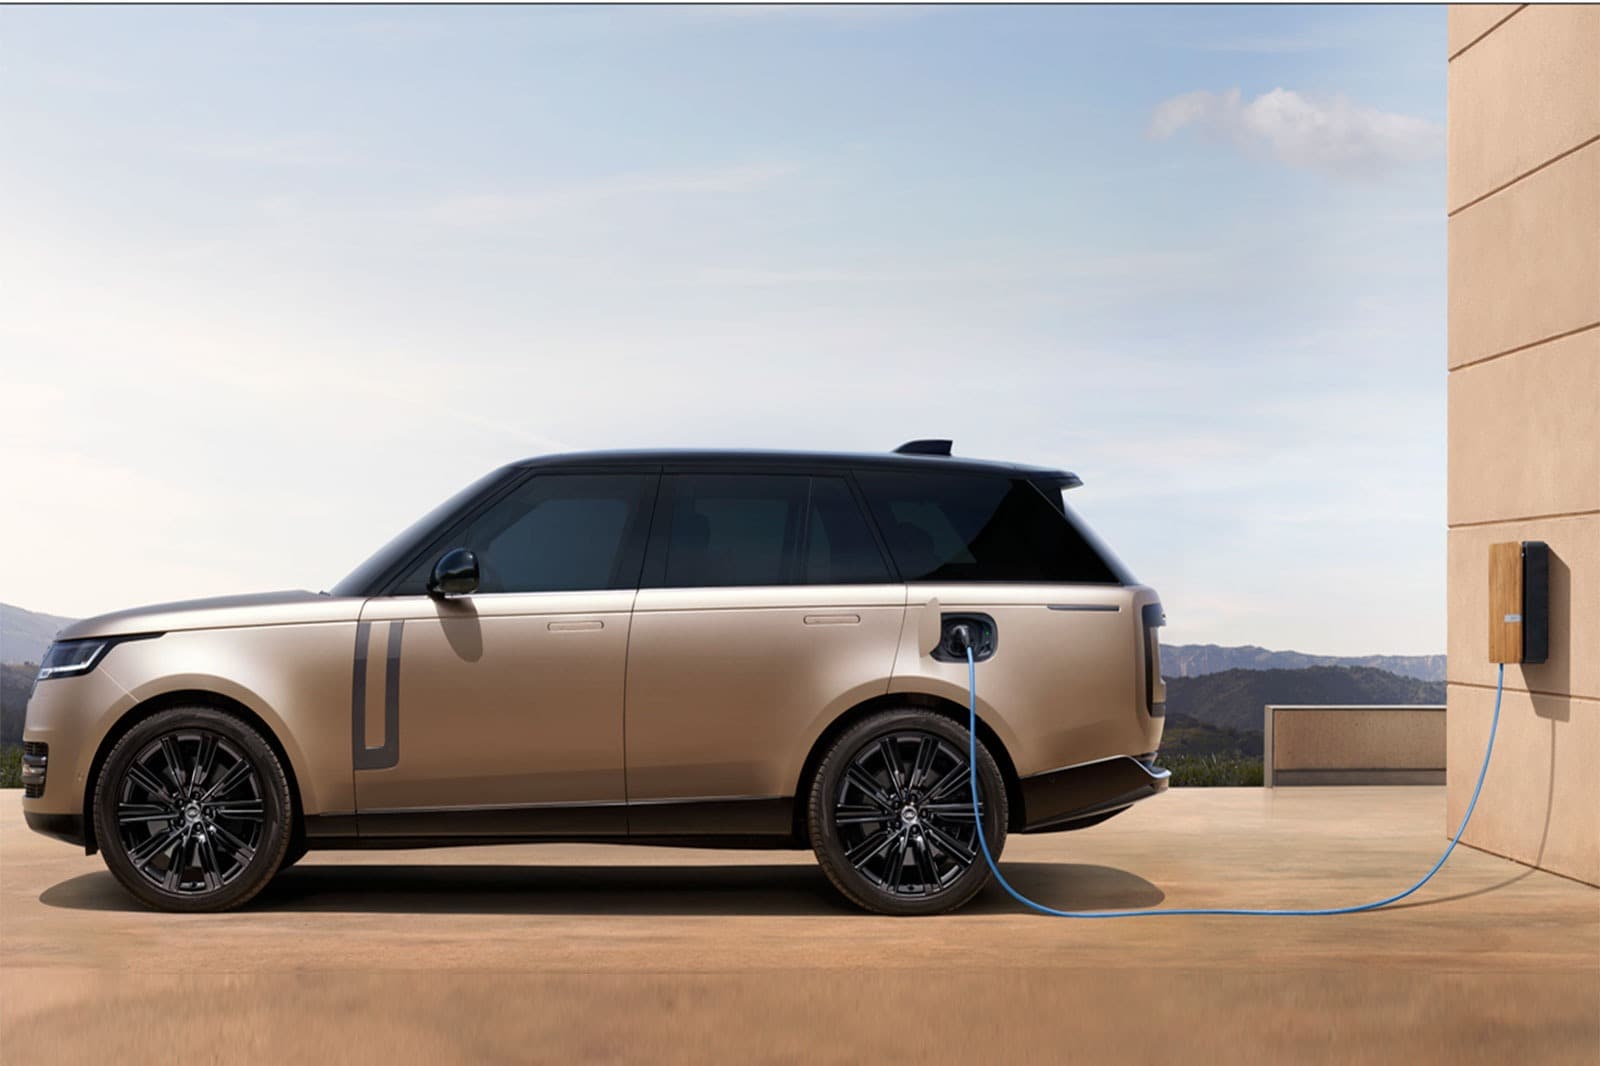 2023 Land Rover Range Rover Plug-In Hybrid Has More Power and Range Than Previous PHEV